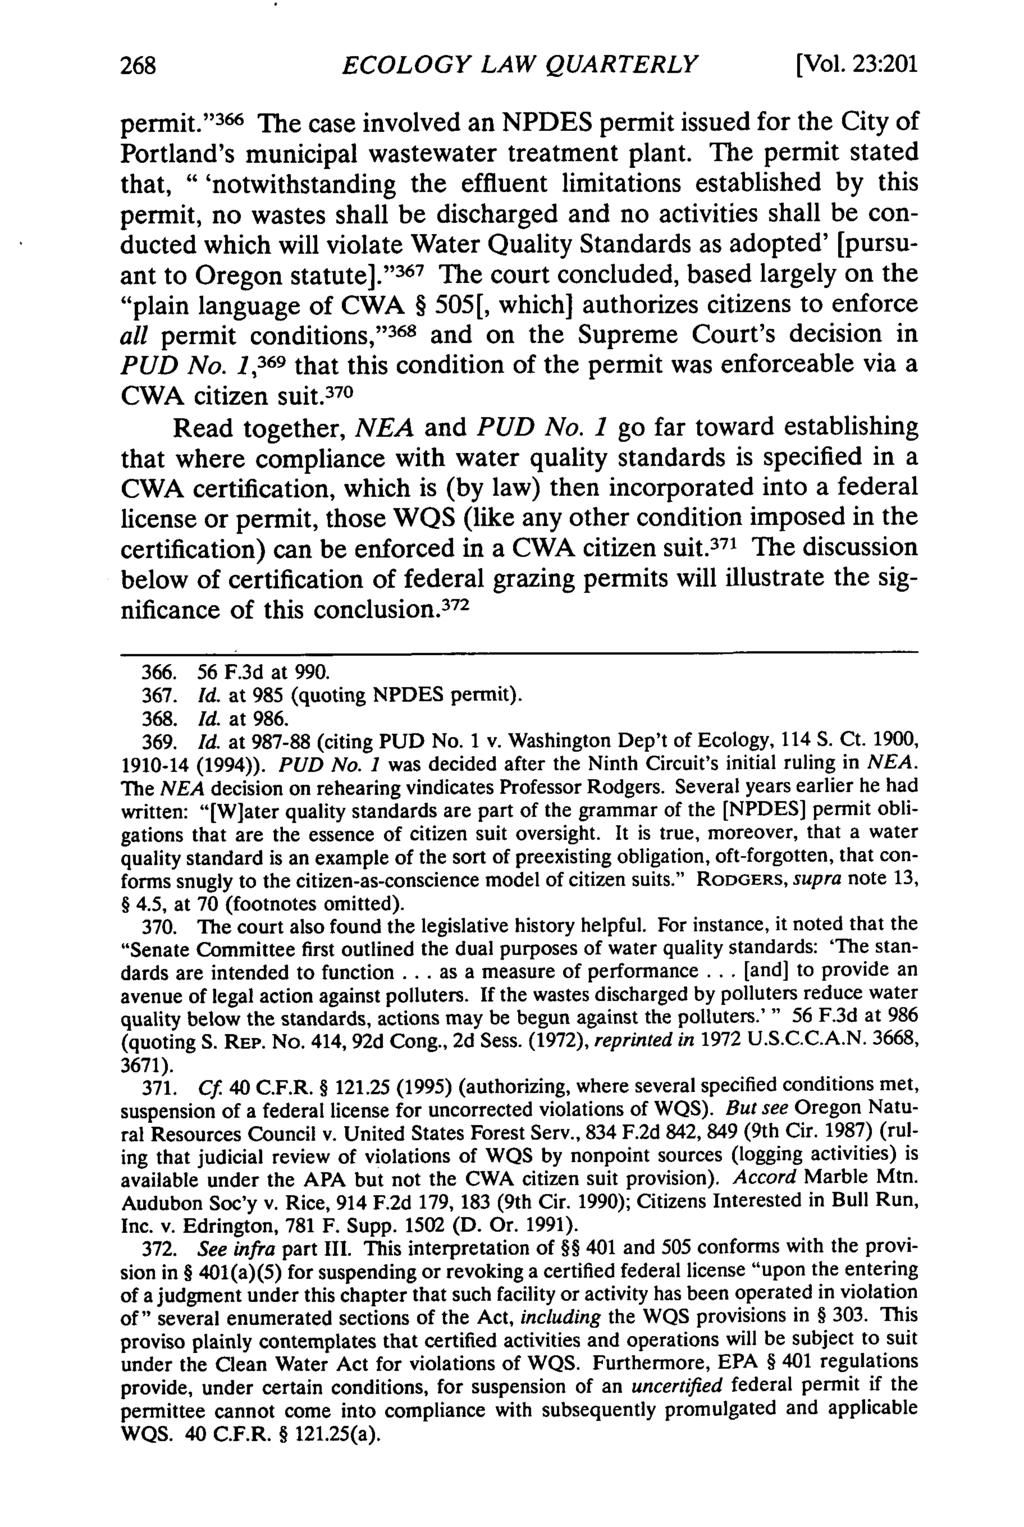 ECOLOGY LAW QUARTERLY [Vol. 23:201 permit. '366 The case involved an NPDES permit issued for the City of Portland's municipal wastewater treatment plant.